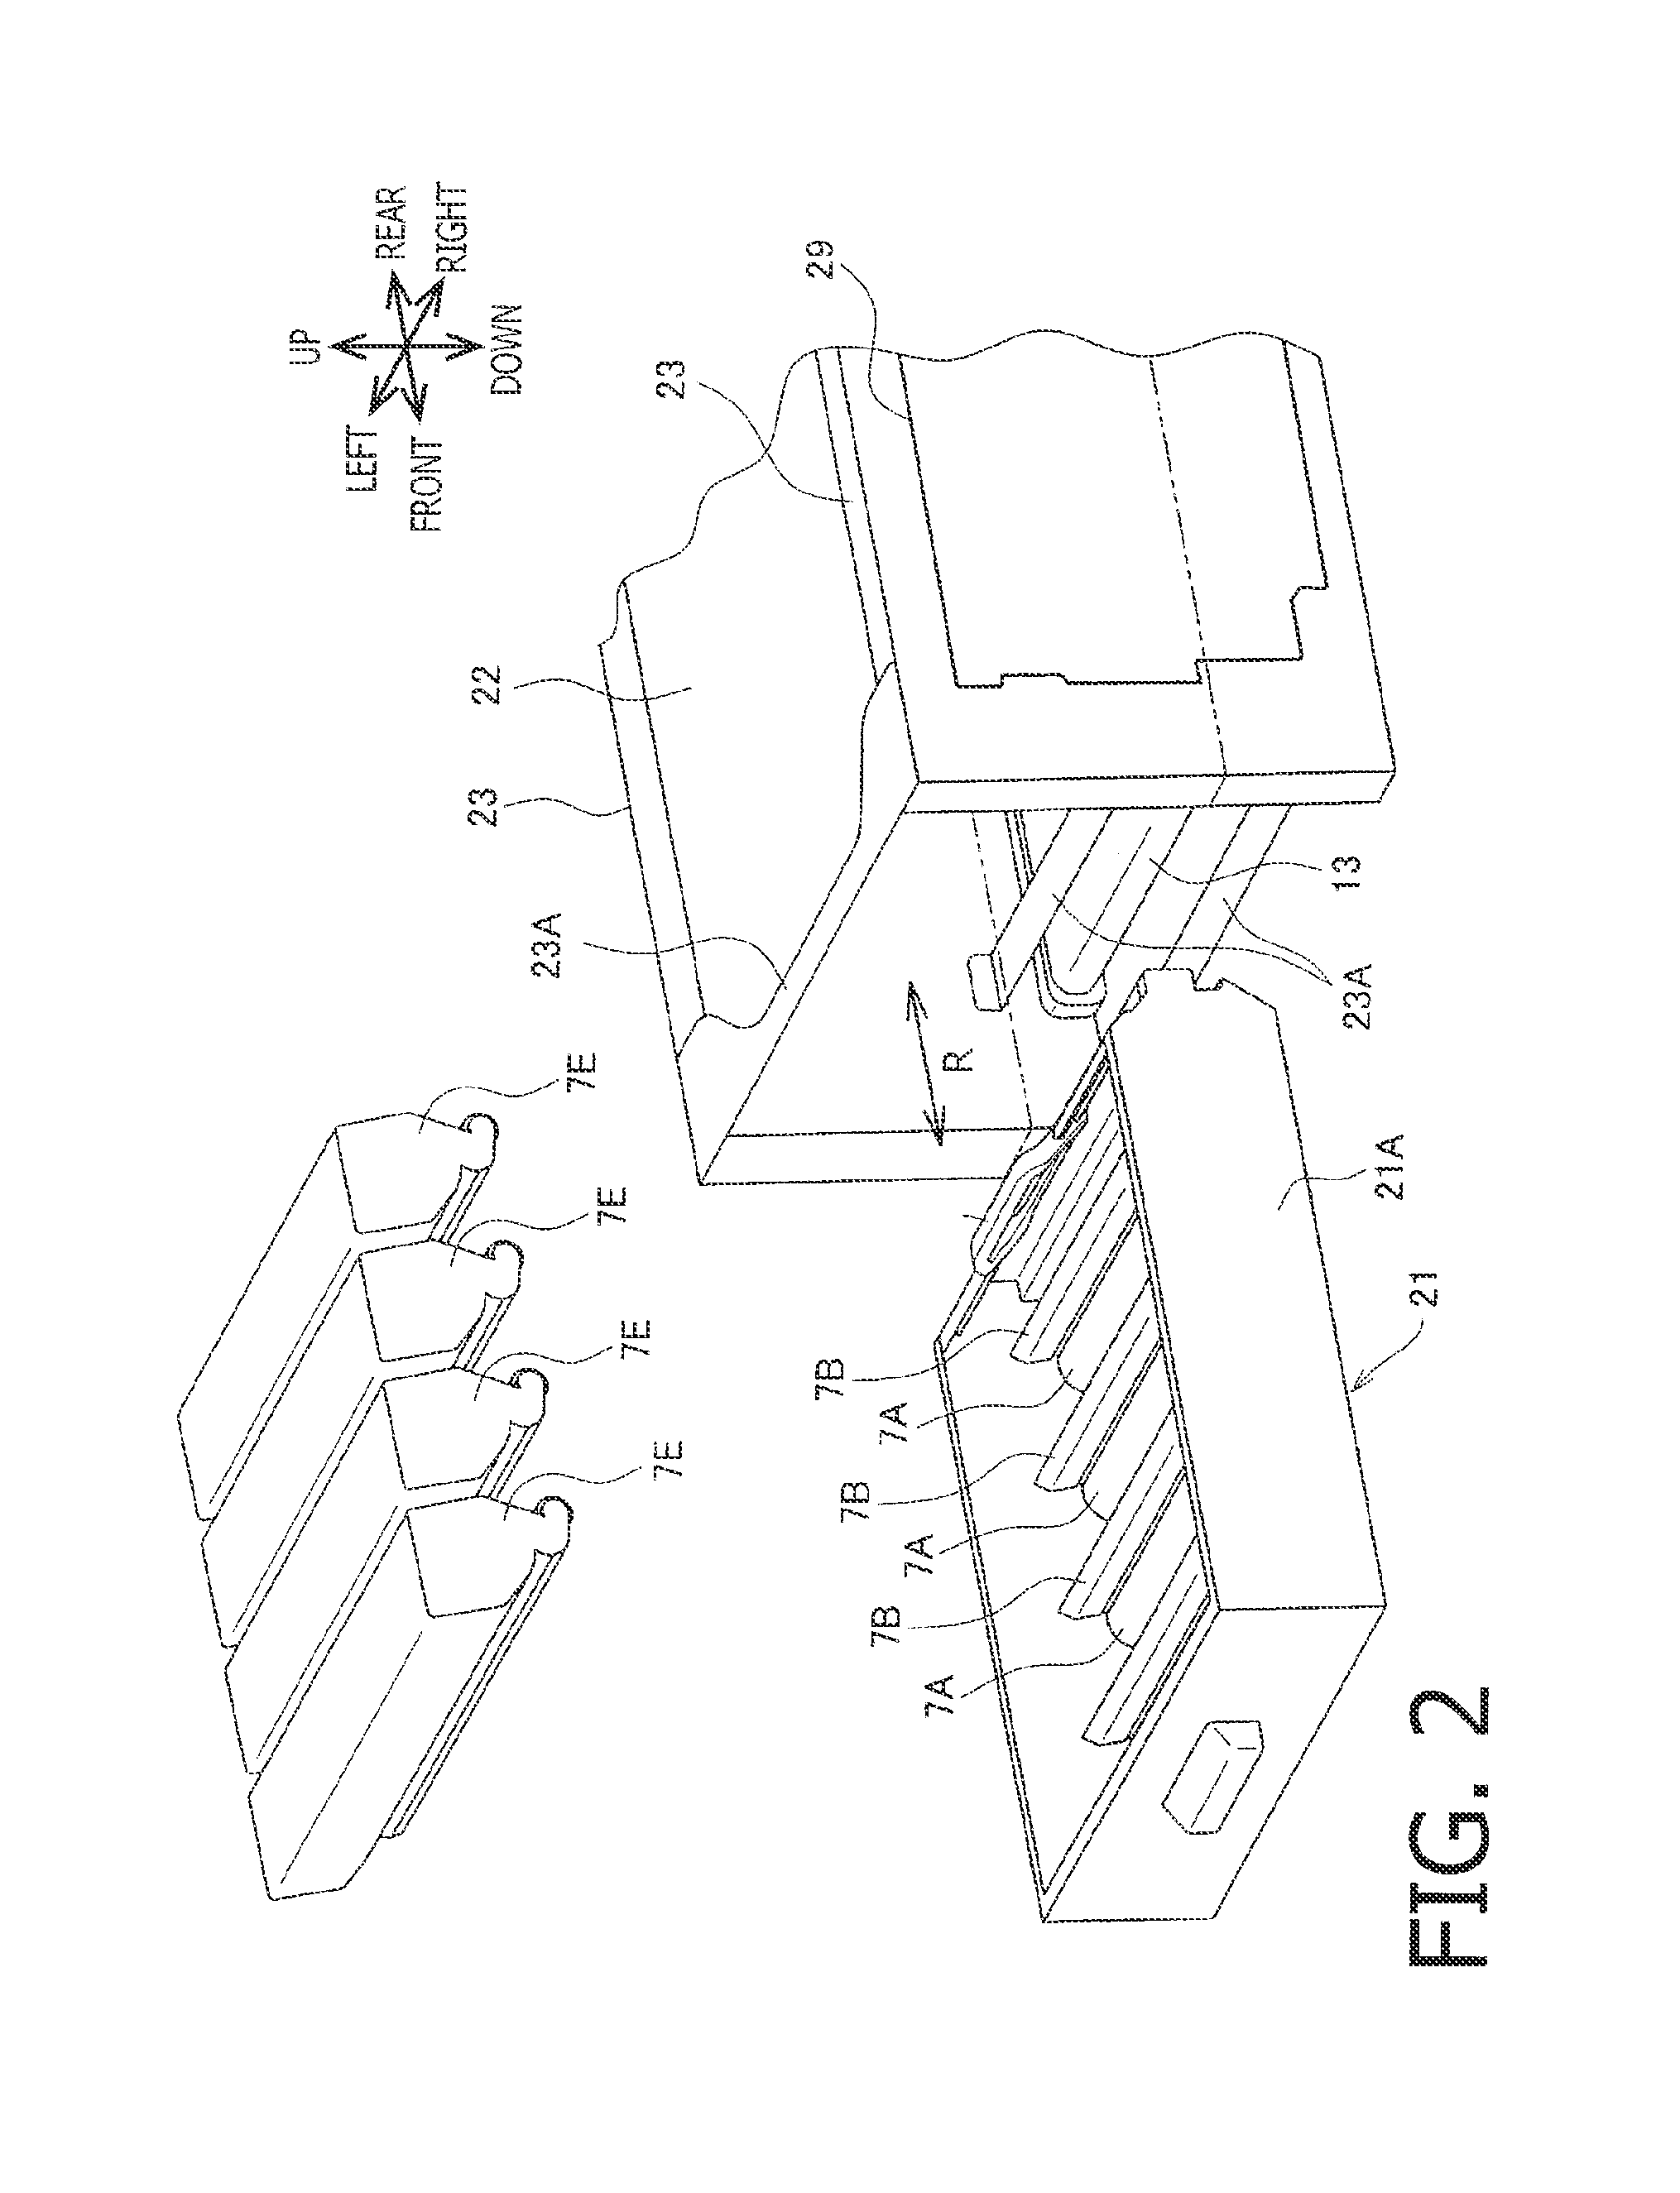 Image formation device having first frame for supporting image formation unit and second frame of lower flexure rigidity